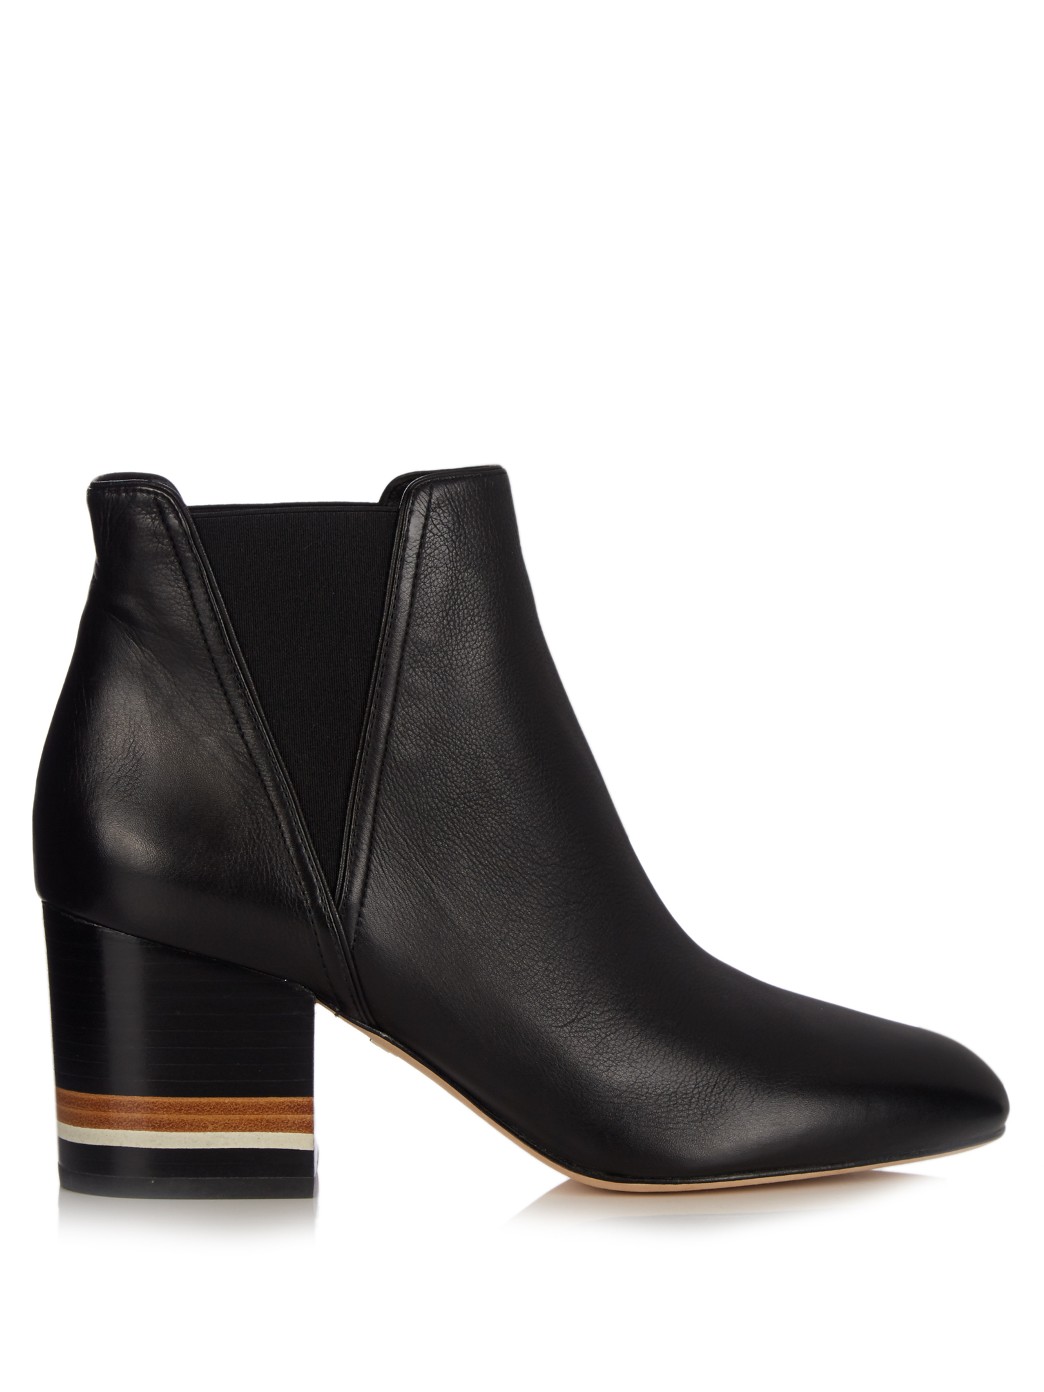 DVF Deblin Ankle Boots, $348